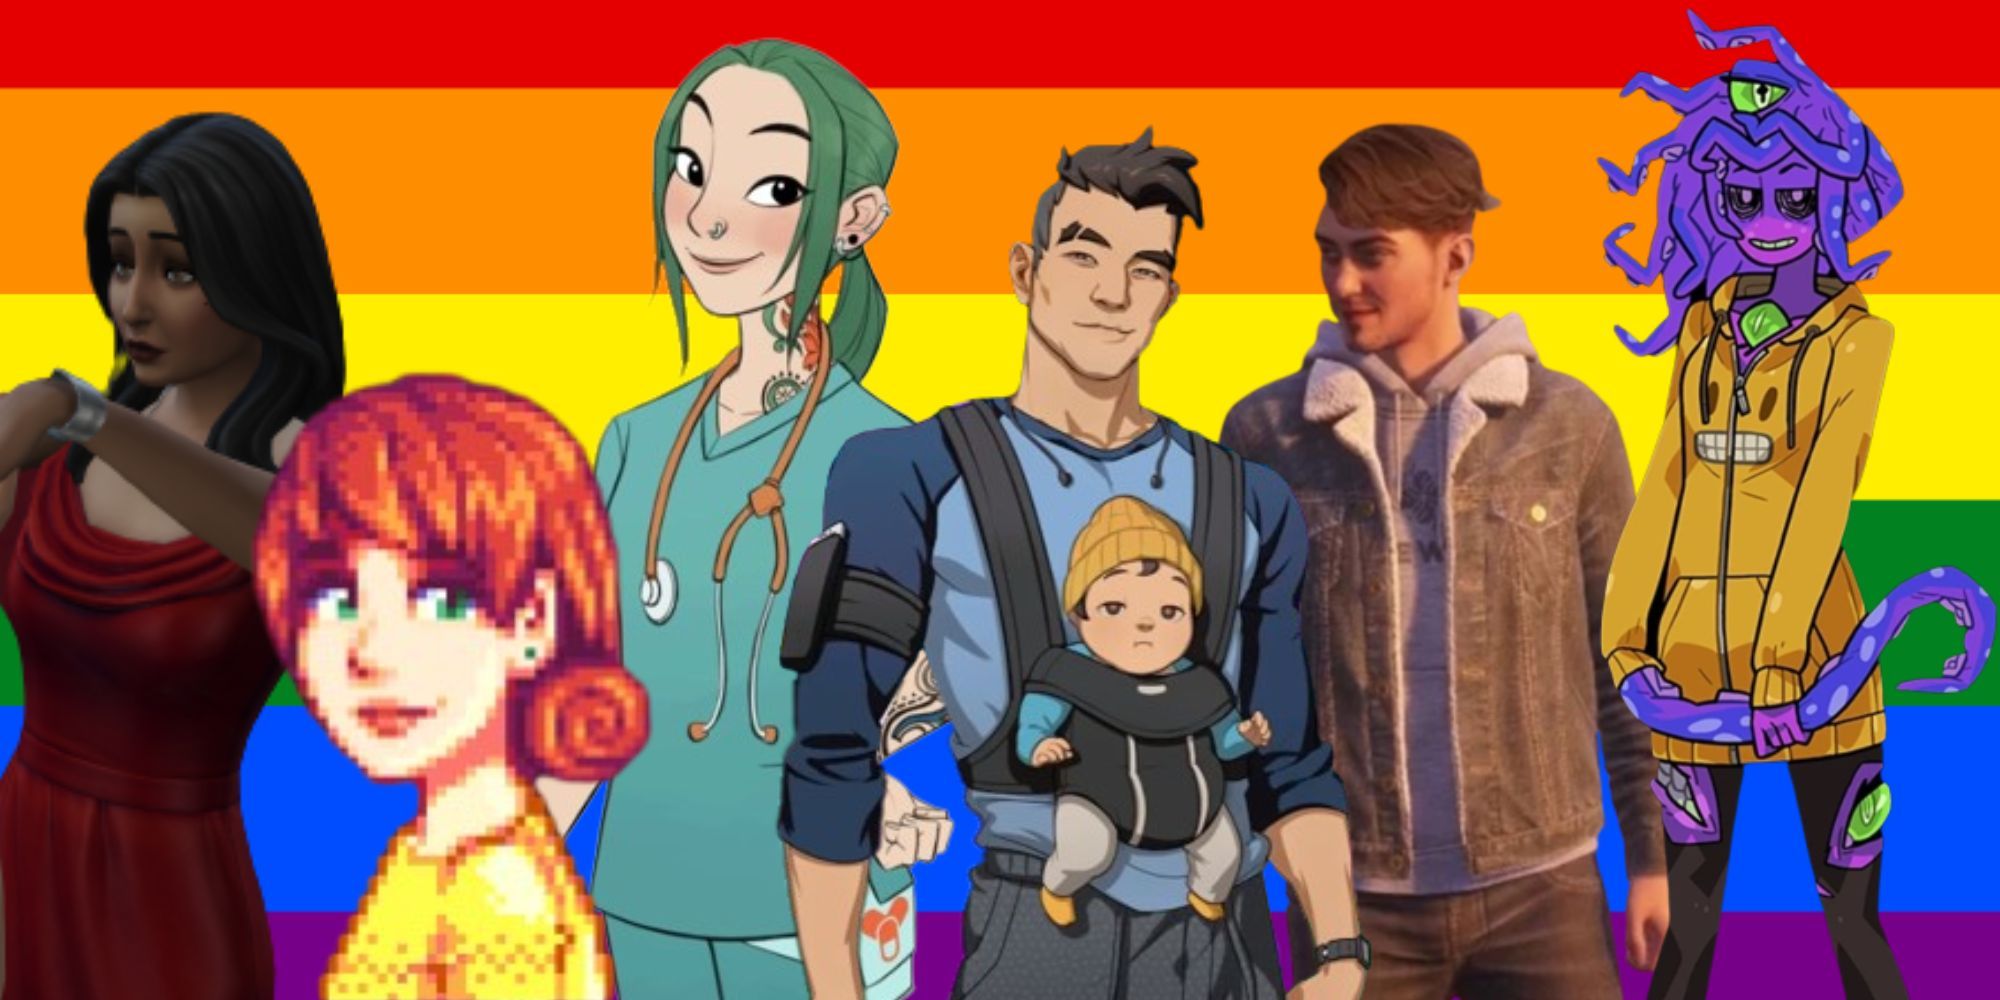 pride flag with bella goth from the sims 4, penny from stardew valley, yuri from coral island, craig from dream daddy, tyler ronan from tell me why and zoe from monster prom